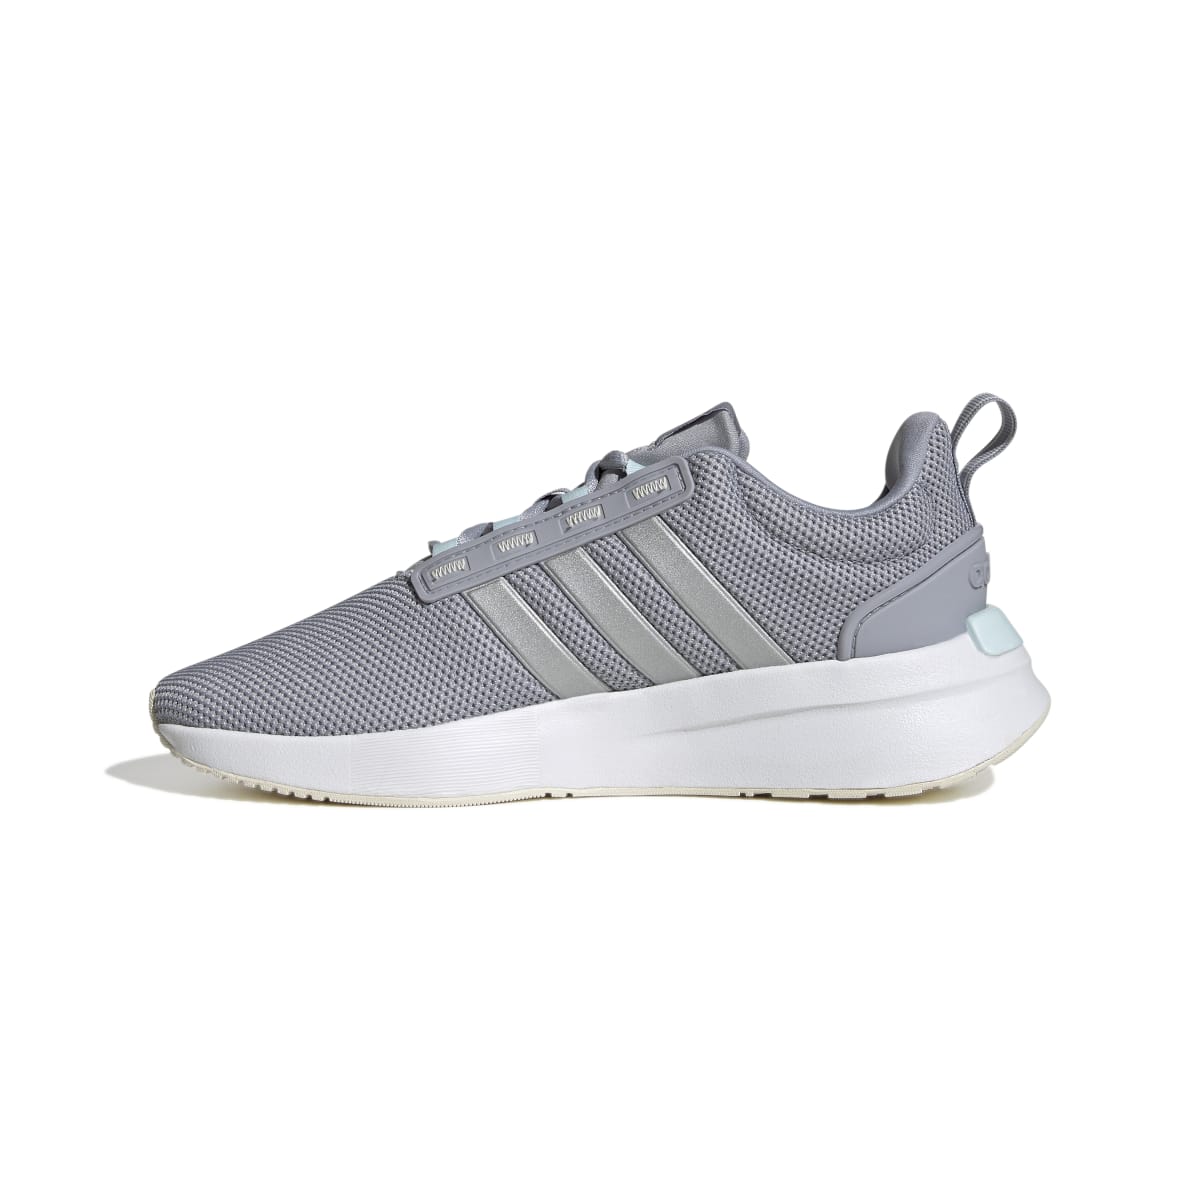 ADIDAS GX4202 RACER TR21 WMN'S (Medium) Silver/Silver/Grey Leather & Textile Running Shoes